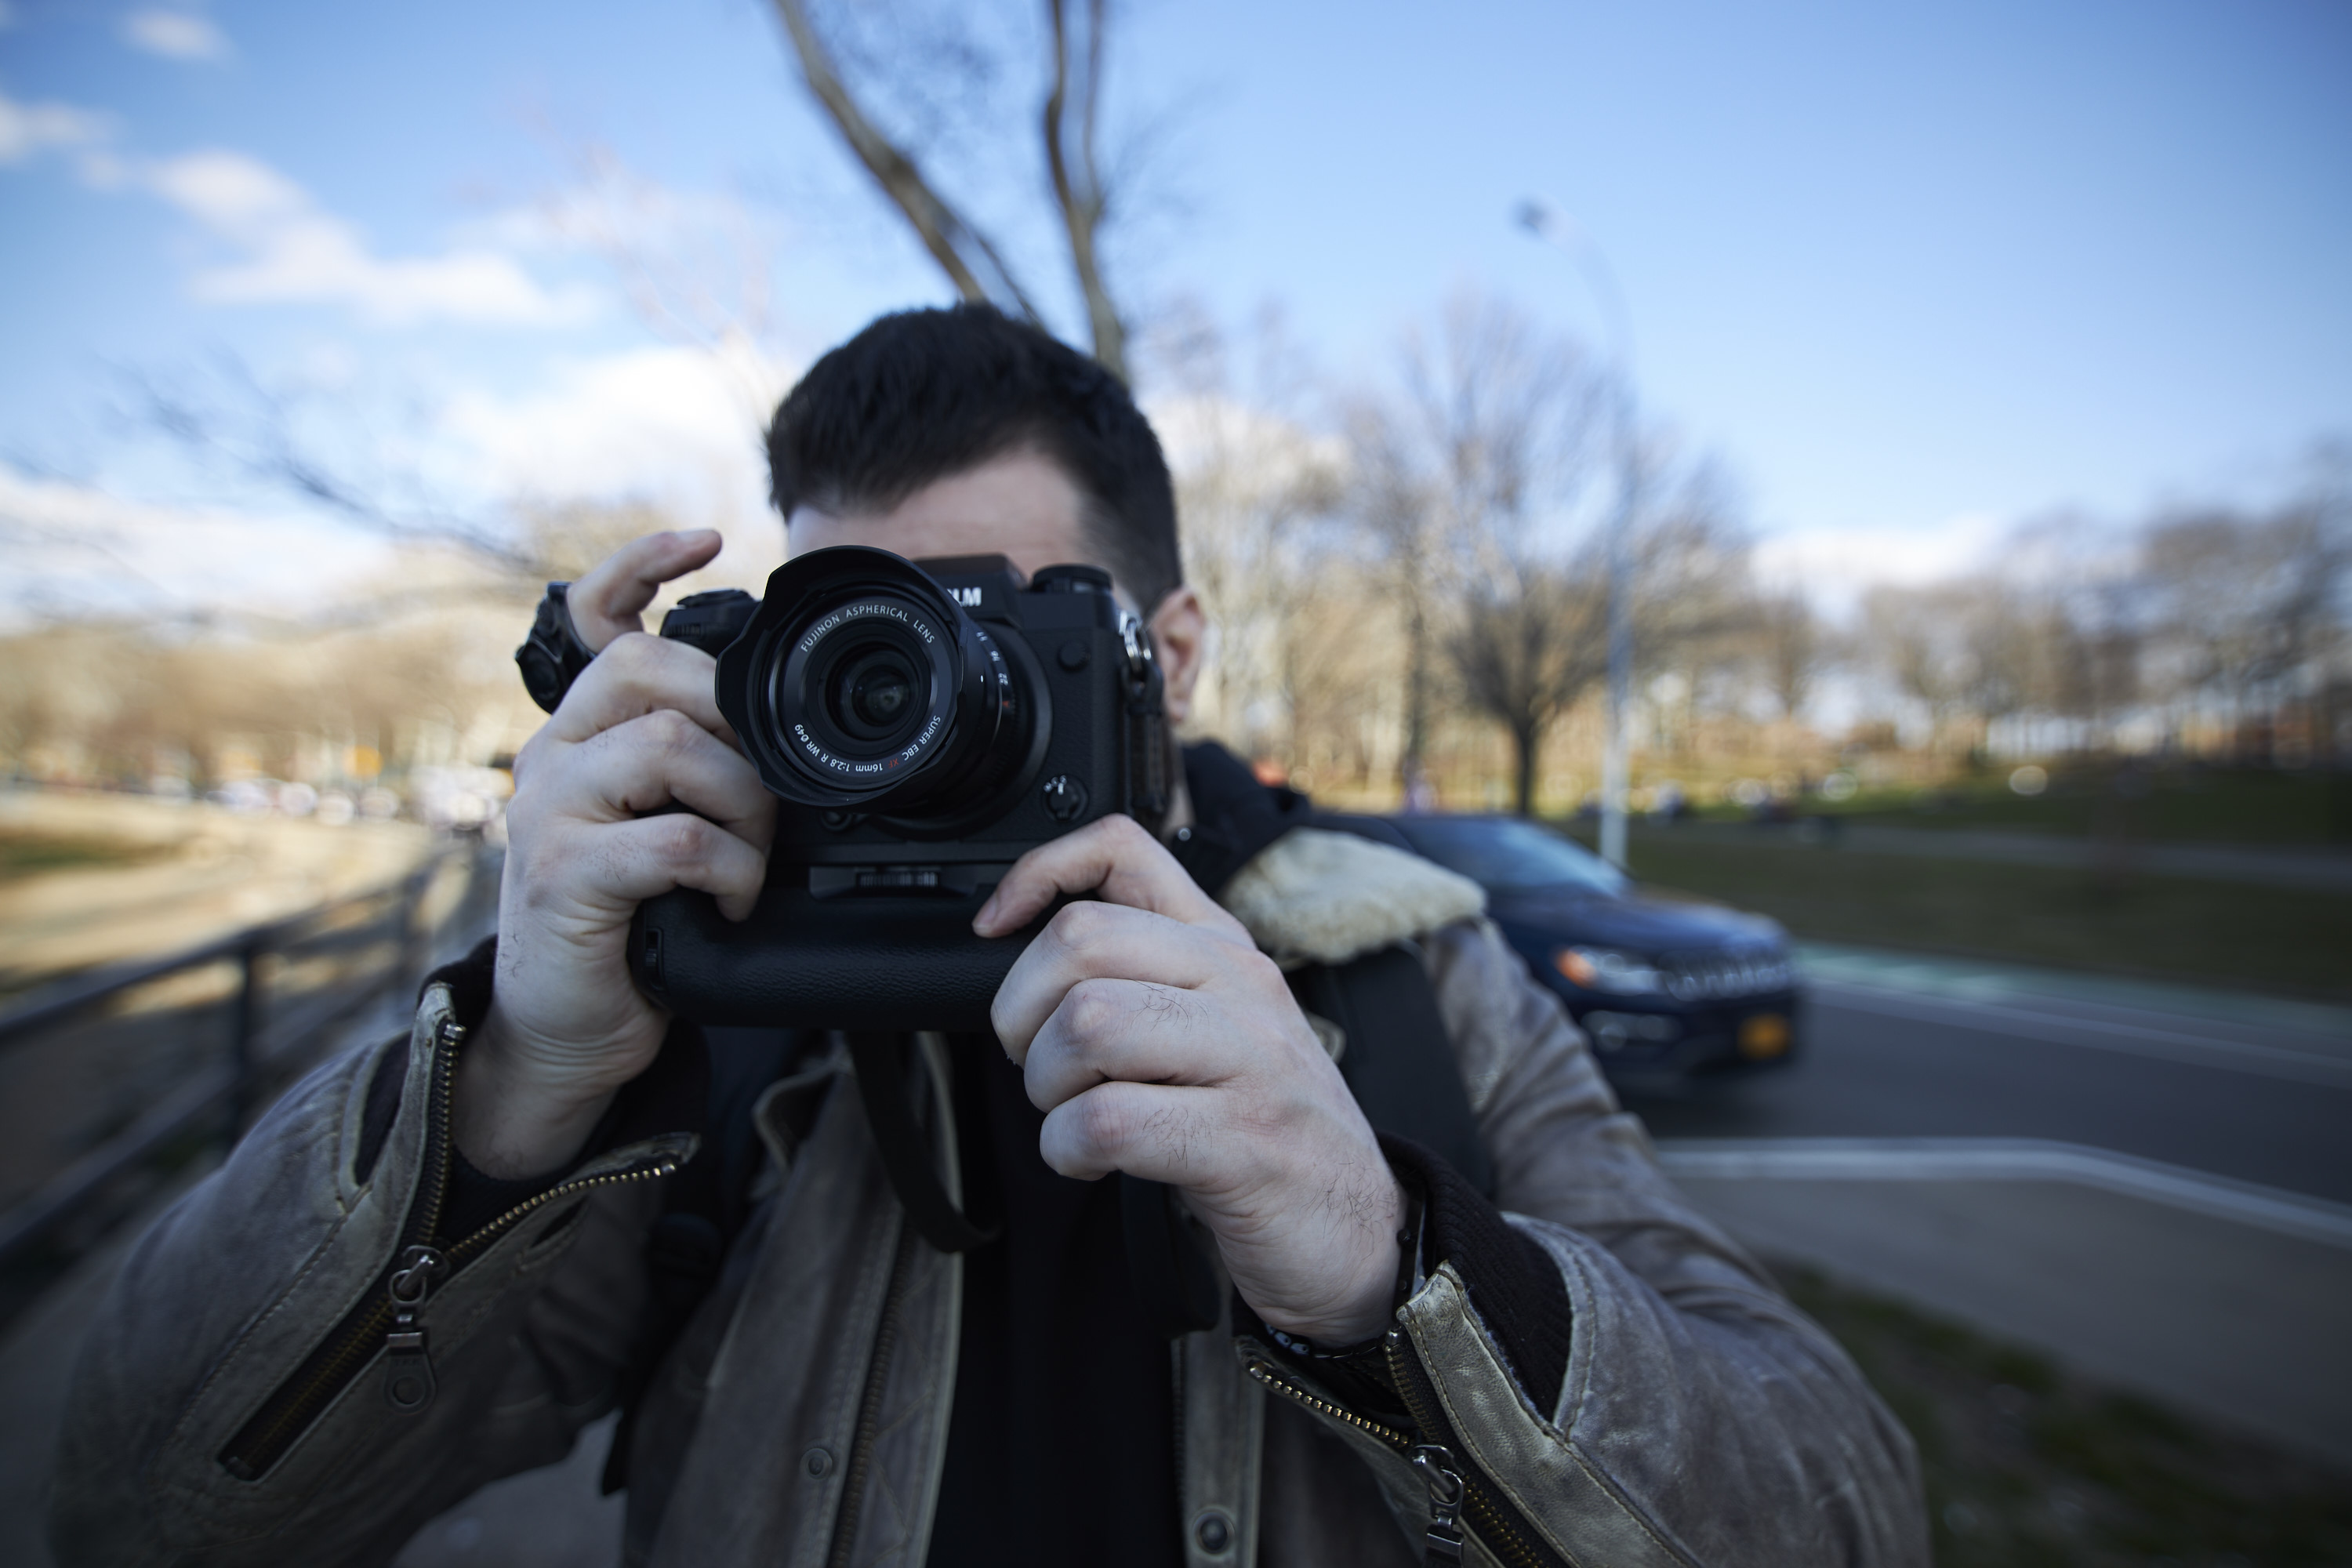 Chris Gampat The Phoblographer Tokina 16-28mm f2.8 OPERA lens review f2.8, ISO 100, 1-500s